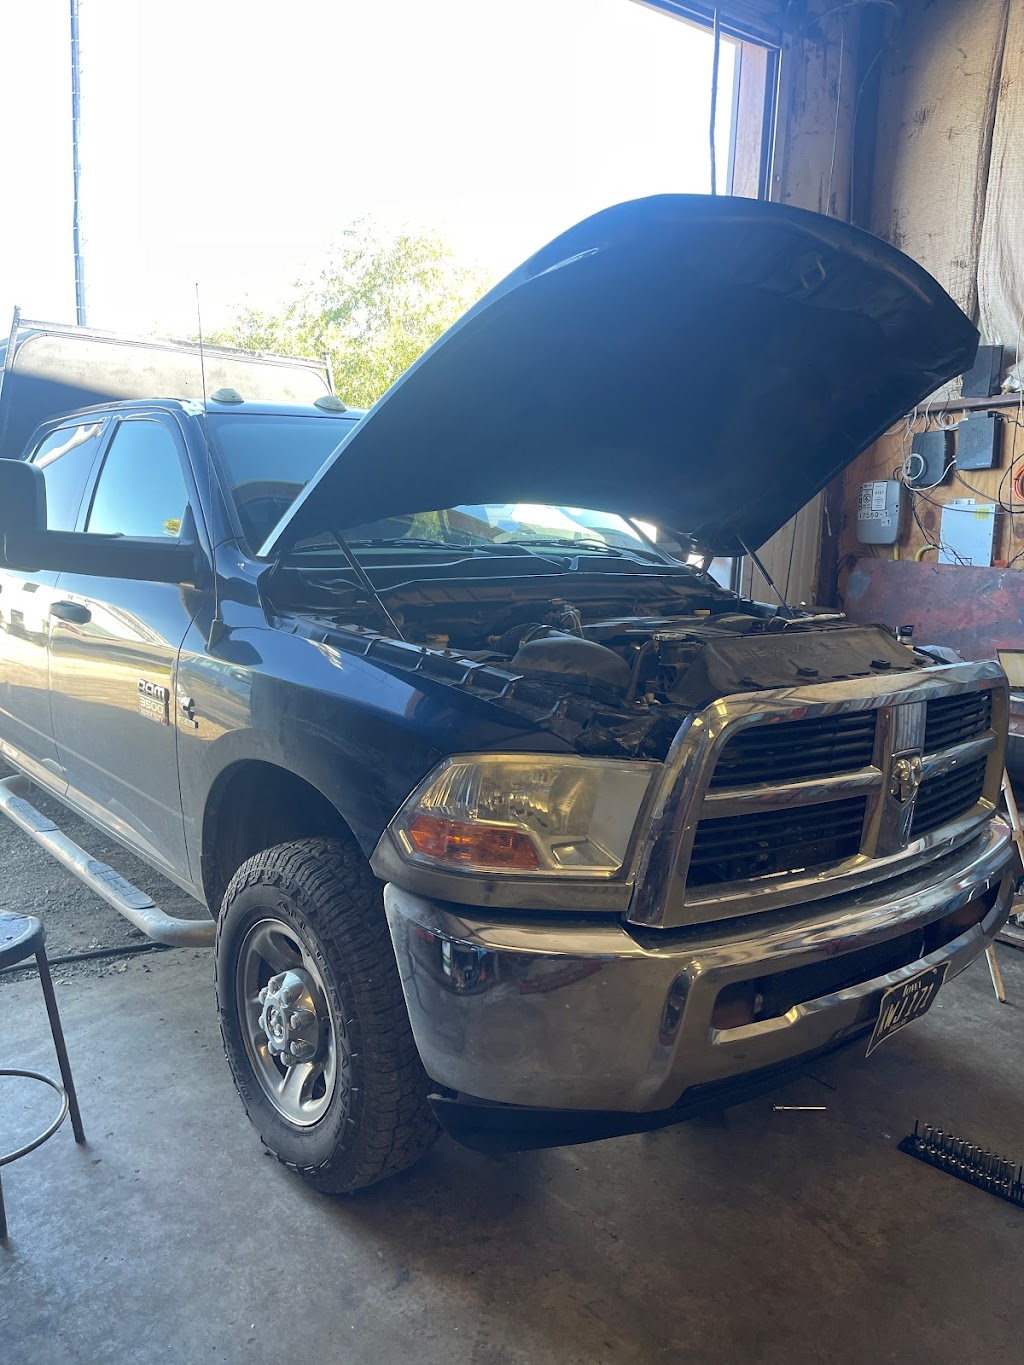 CEDOS AUTOMOTIVE REPAIR | 7560 Rendon Bloodworth Rd, Mansfield, TX 76063, USA | Phone: (817) 680-0050